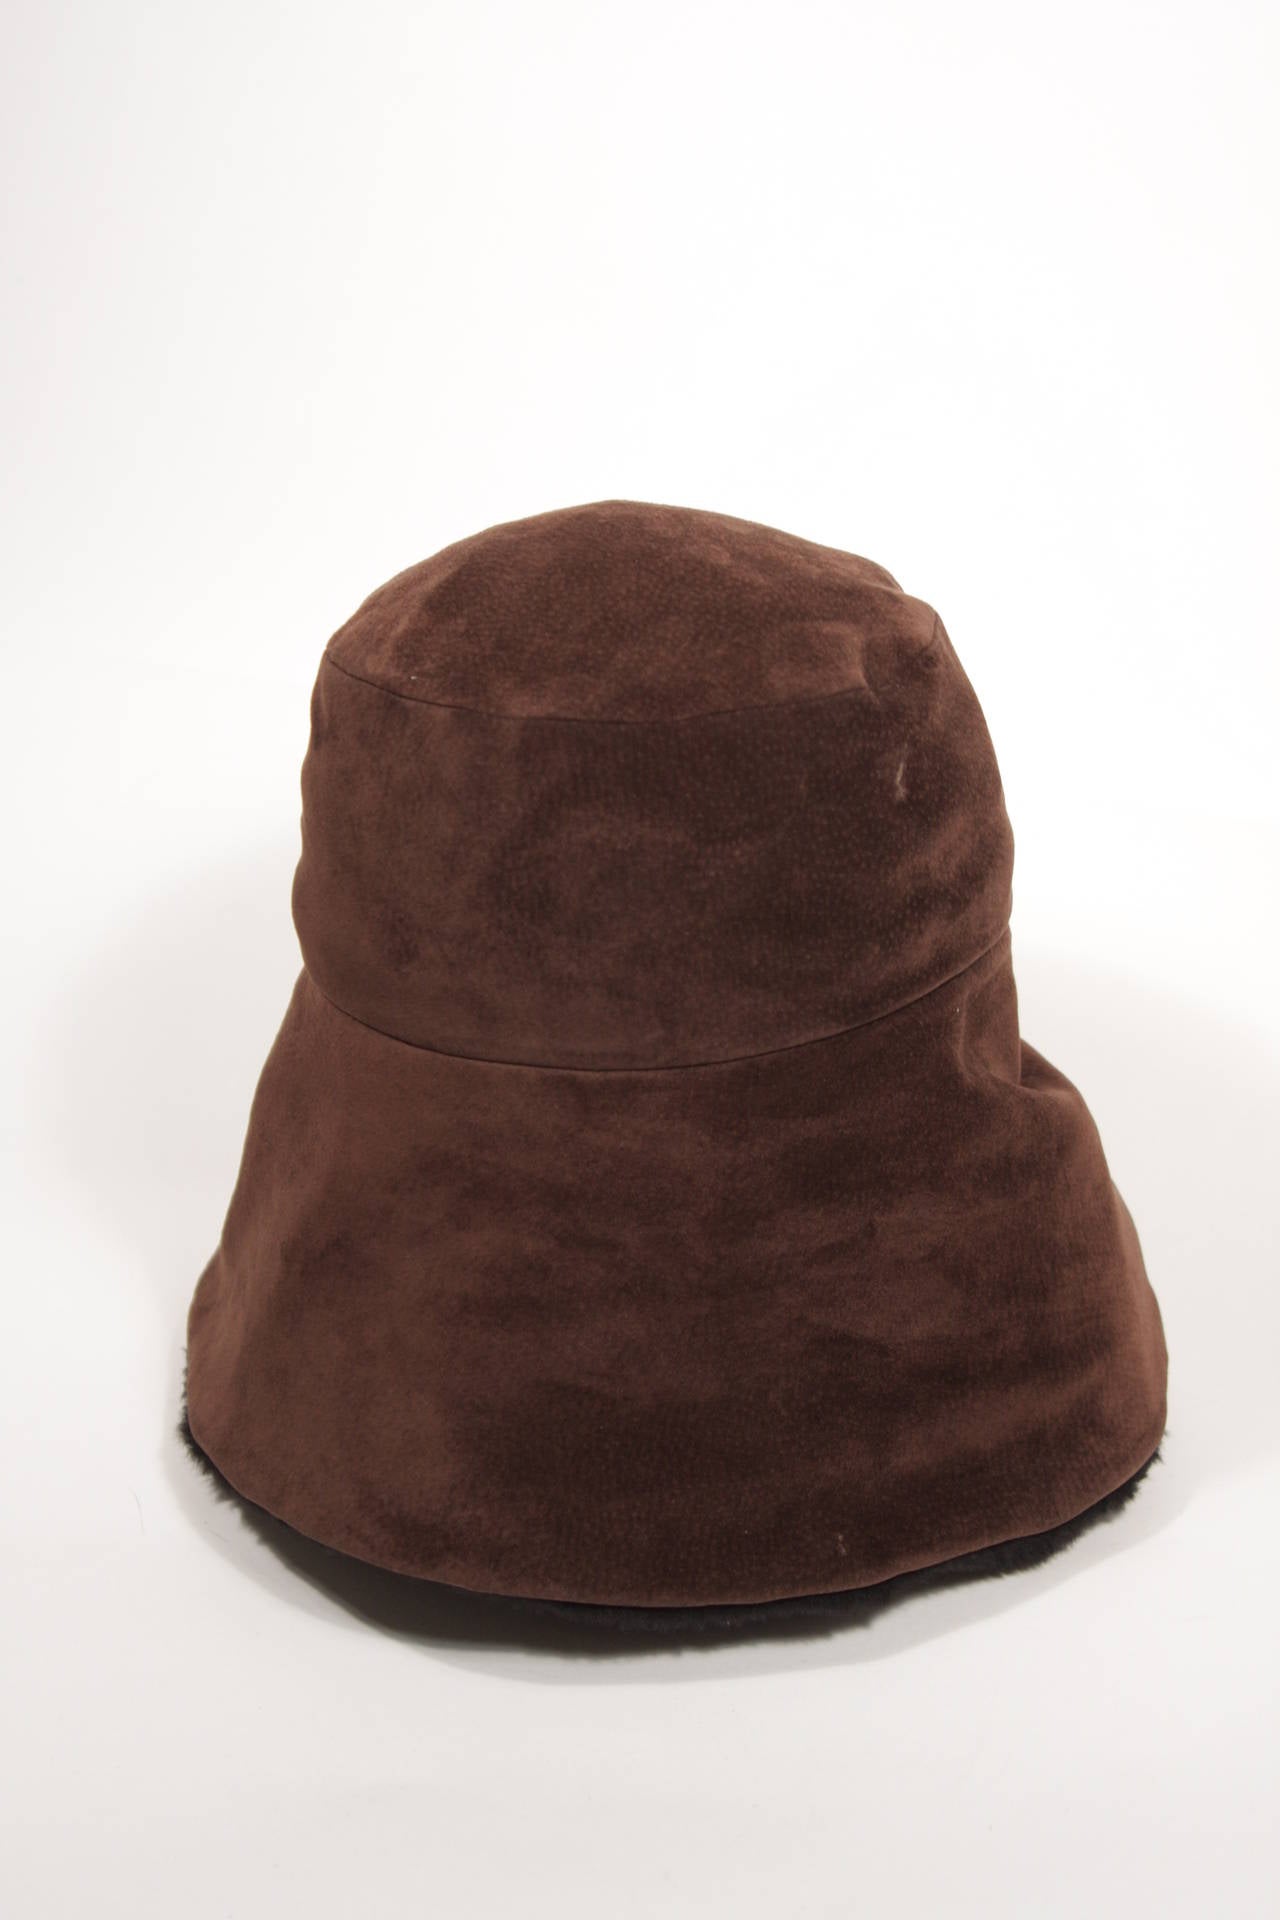 Yves Saint Laurent Brown Suede Hat with Black Sherling Interior 3